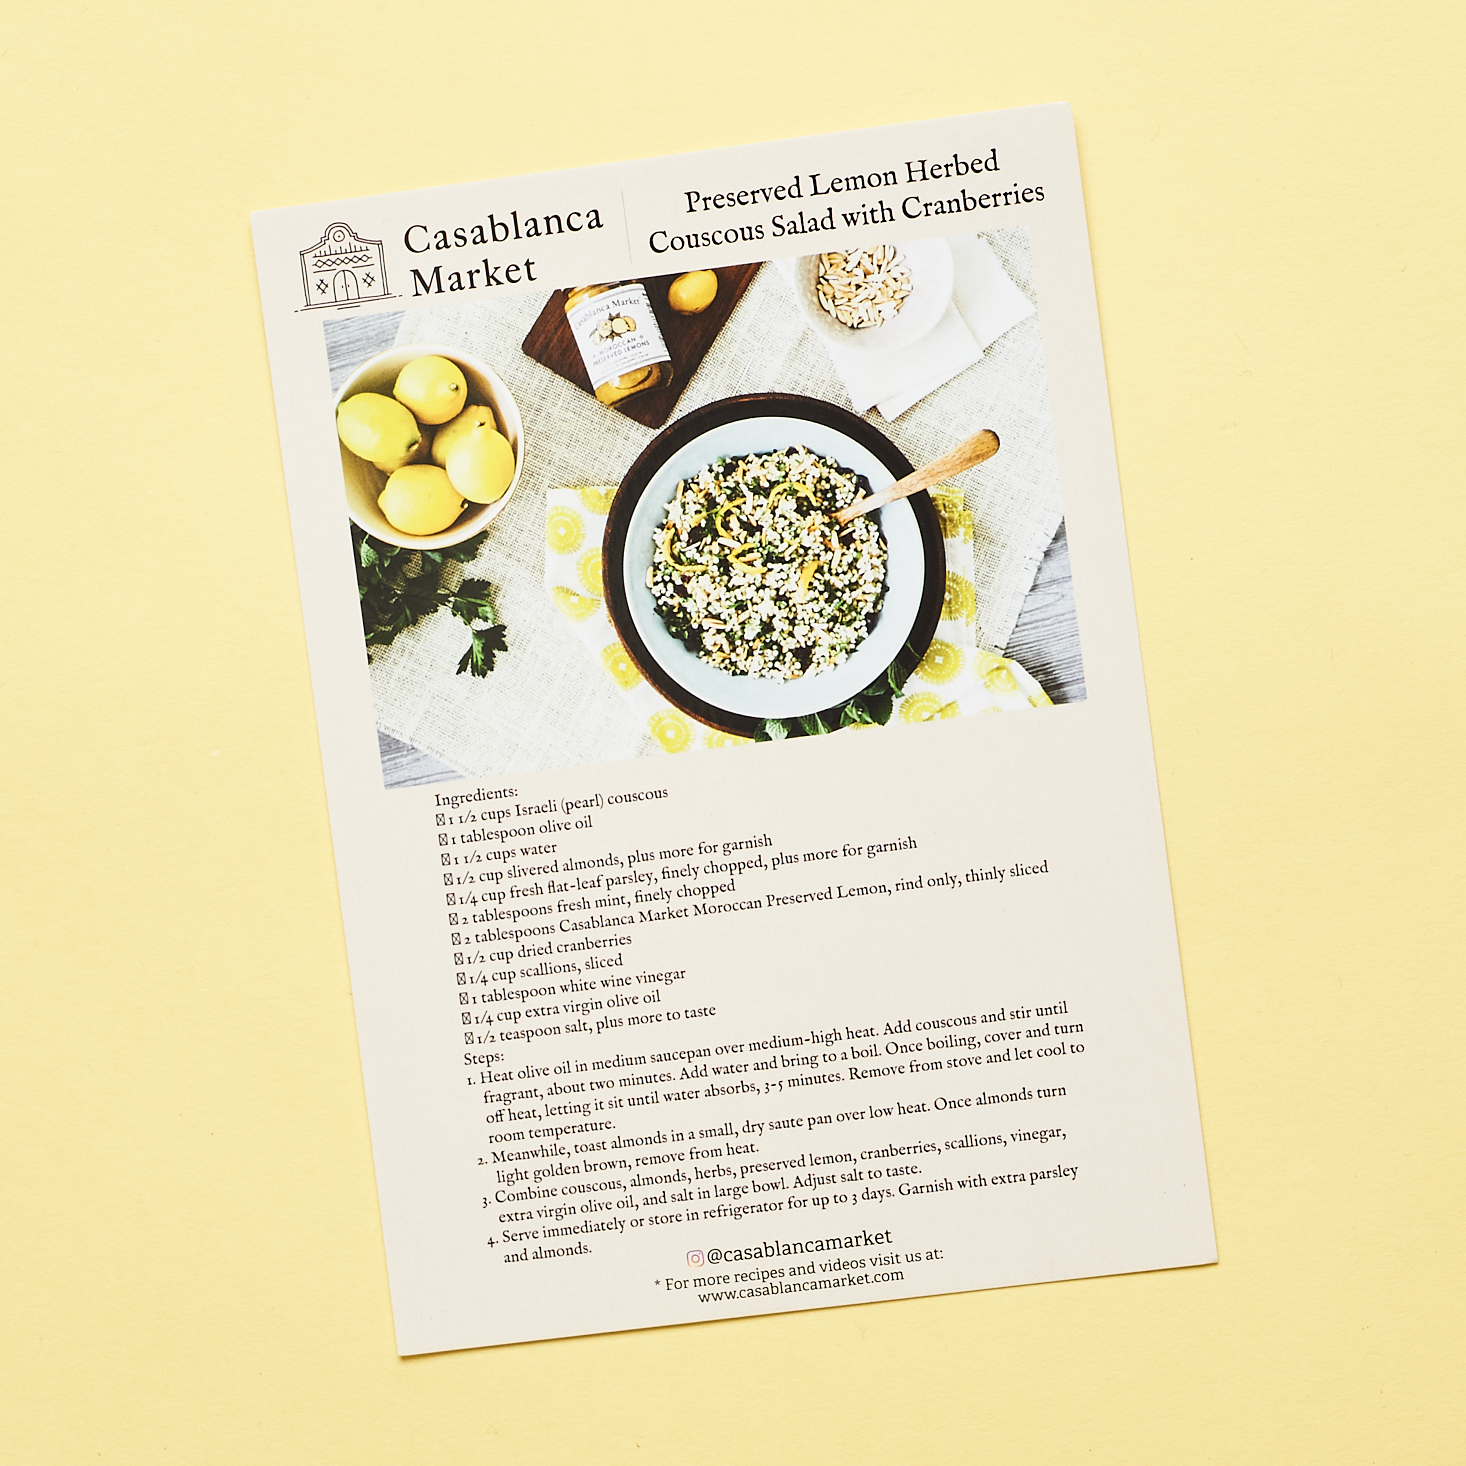 Recipe card for Preserved Lemon Herbed Couscous Salad with Cranberries.